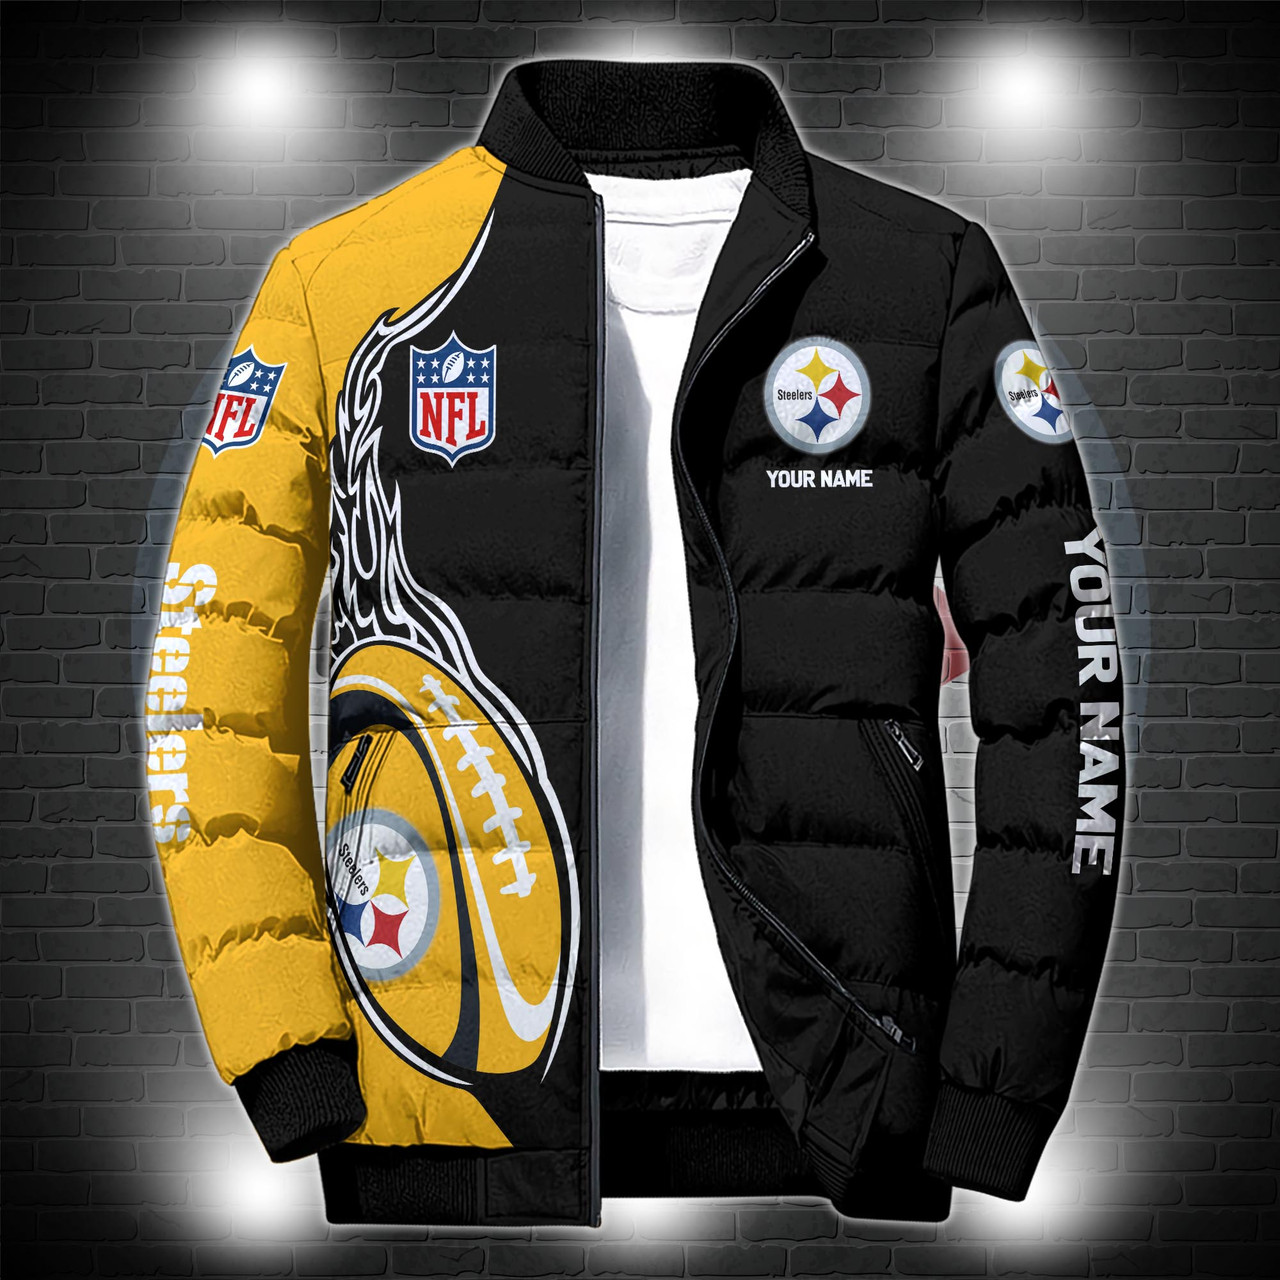 **(N.F.L.PITTSBURGH-STEELERS-TEAM-SPORT-PUFFER-JACKETS/ADD-YOUR-OWN-CUSTOM-NAME/OFFICIAL-STEELERS-TEAM-COLORS & OFFICIAL-STEELERS-TEAM-LOGOS/GRAPHIC-3D-PRINTED-DOUBLE-SIDED-ALL-OVER-TEAM-DESIGN/WARM-PREMIUM-N.F.L.STEELERS-TEAM-PUFFER-JACKETS)**